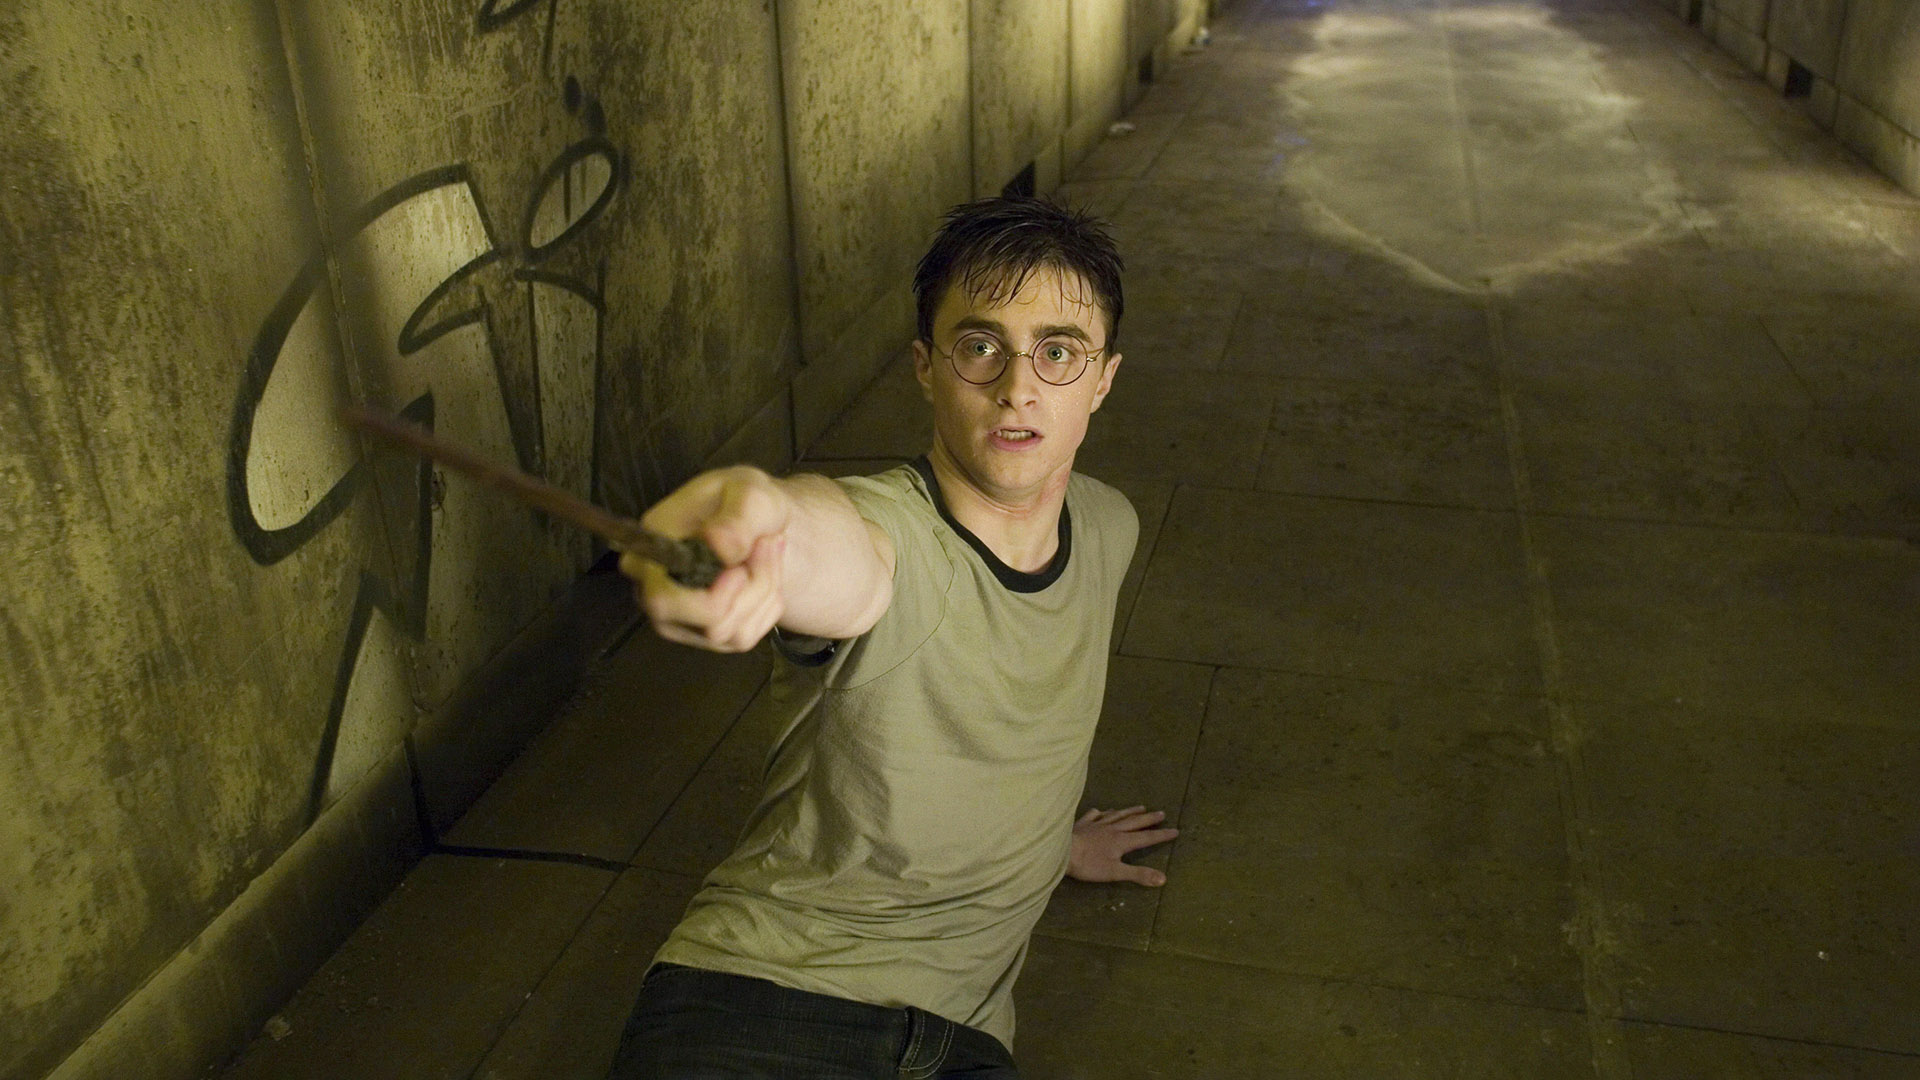 10 Disturbing Things About Harry Potter Wizards That Rowling Never Addressed